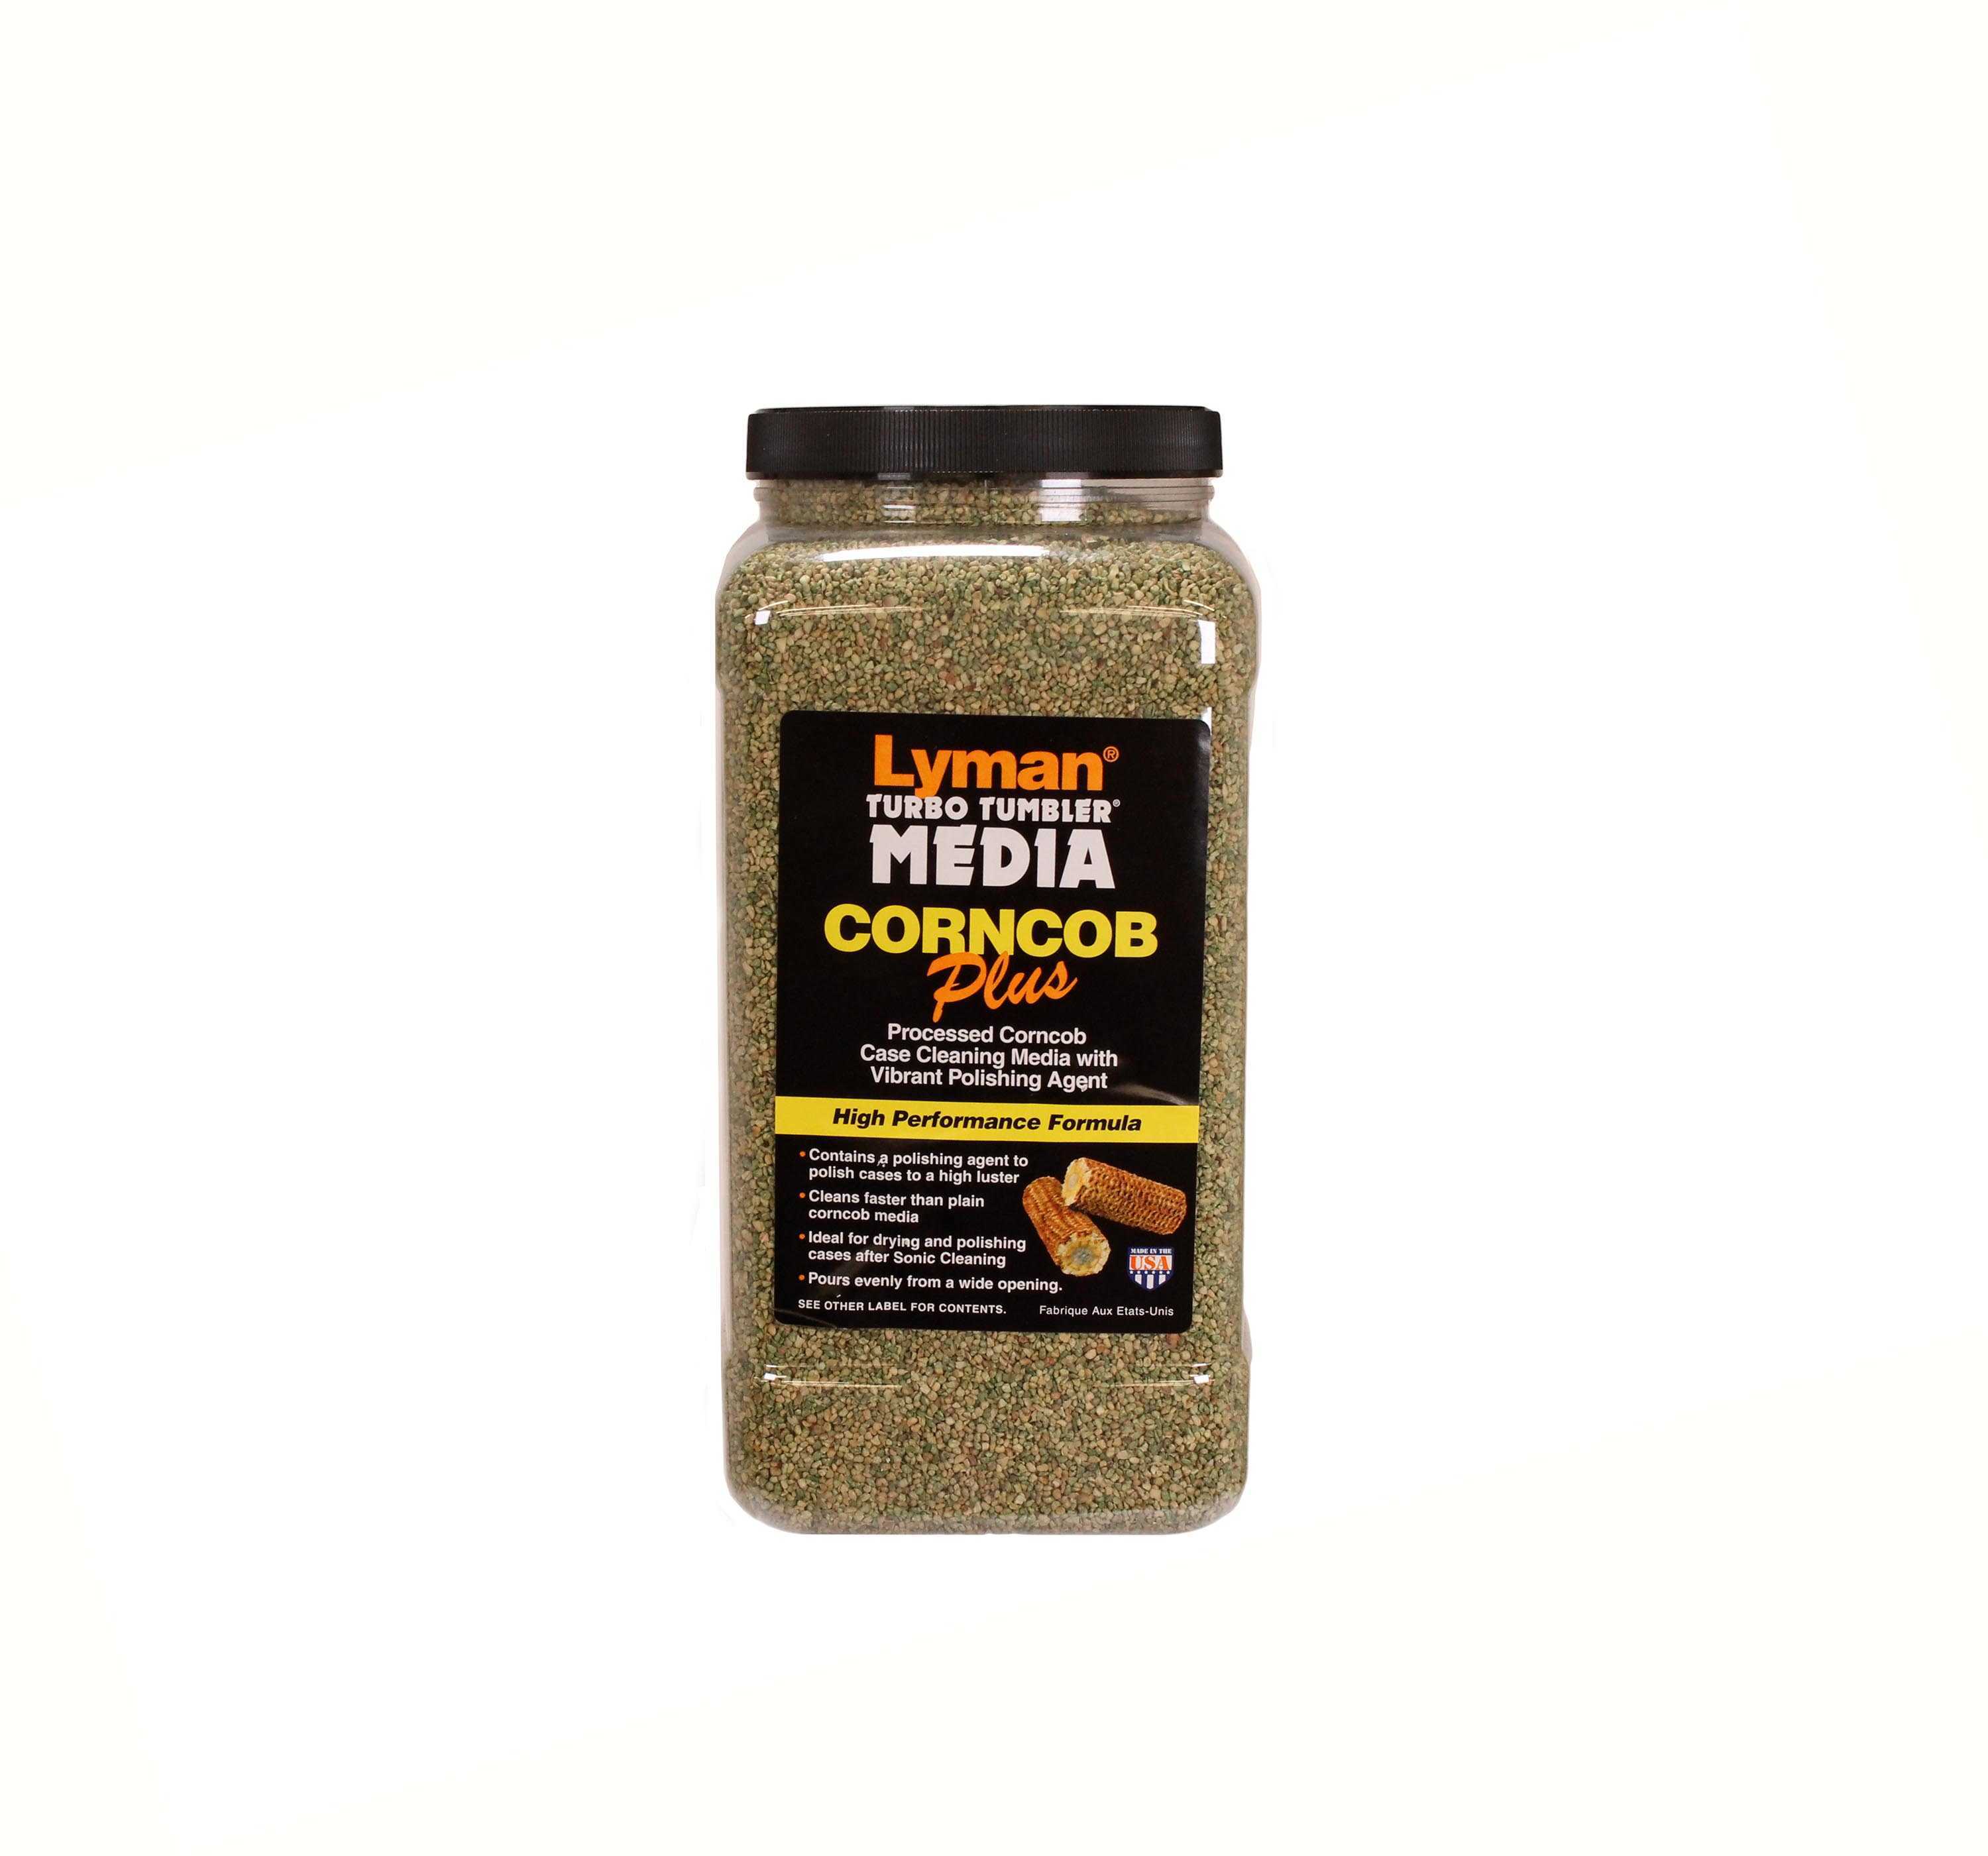 Lyman Turbo Case Cleaning Media Treated Corncob - 6 Lb. "Easy Pour Container" The Most Effective Choice For Dir